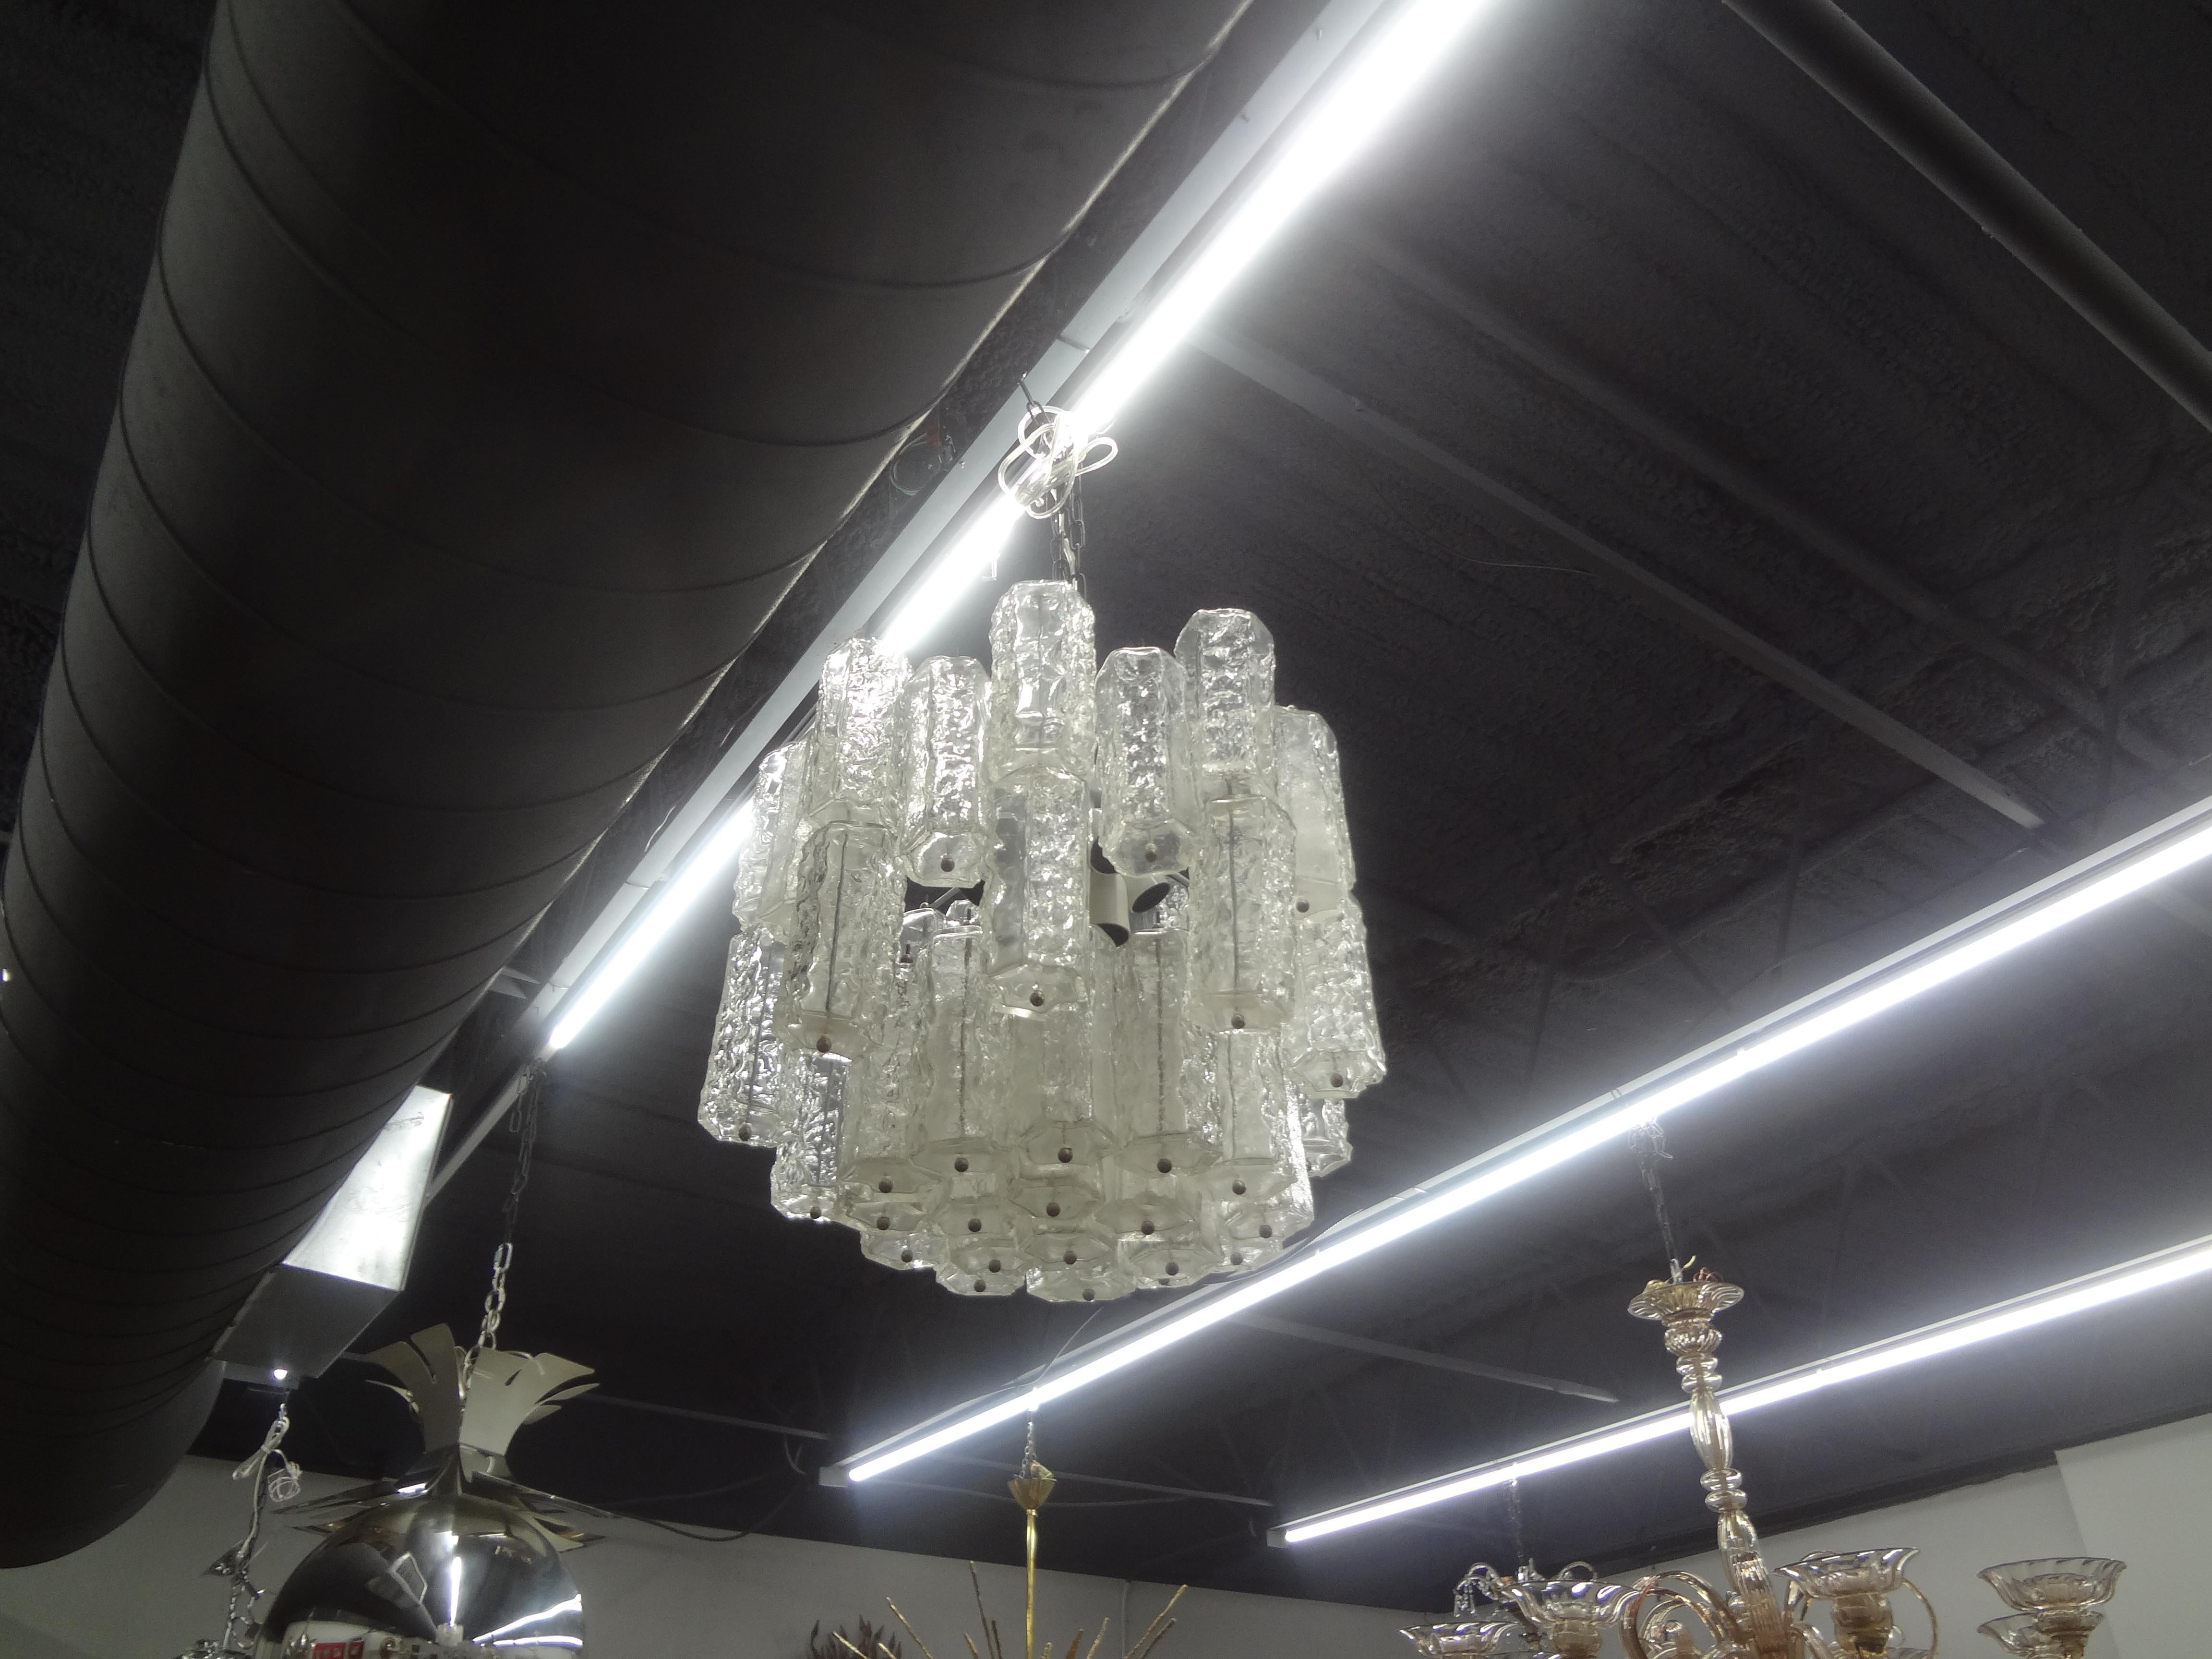 Midcentury Murano Glass Chandelier.
This lovely Hollywood Regency mid century Murano glass chandelier has been newly wired with new sockets for the U.S. market.
Our Toni Zuccheri for Venini style chandelier is perfect for a powder room, dressing